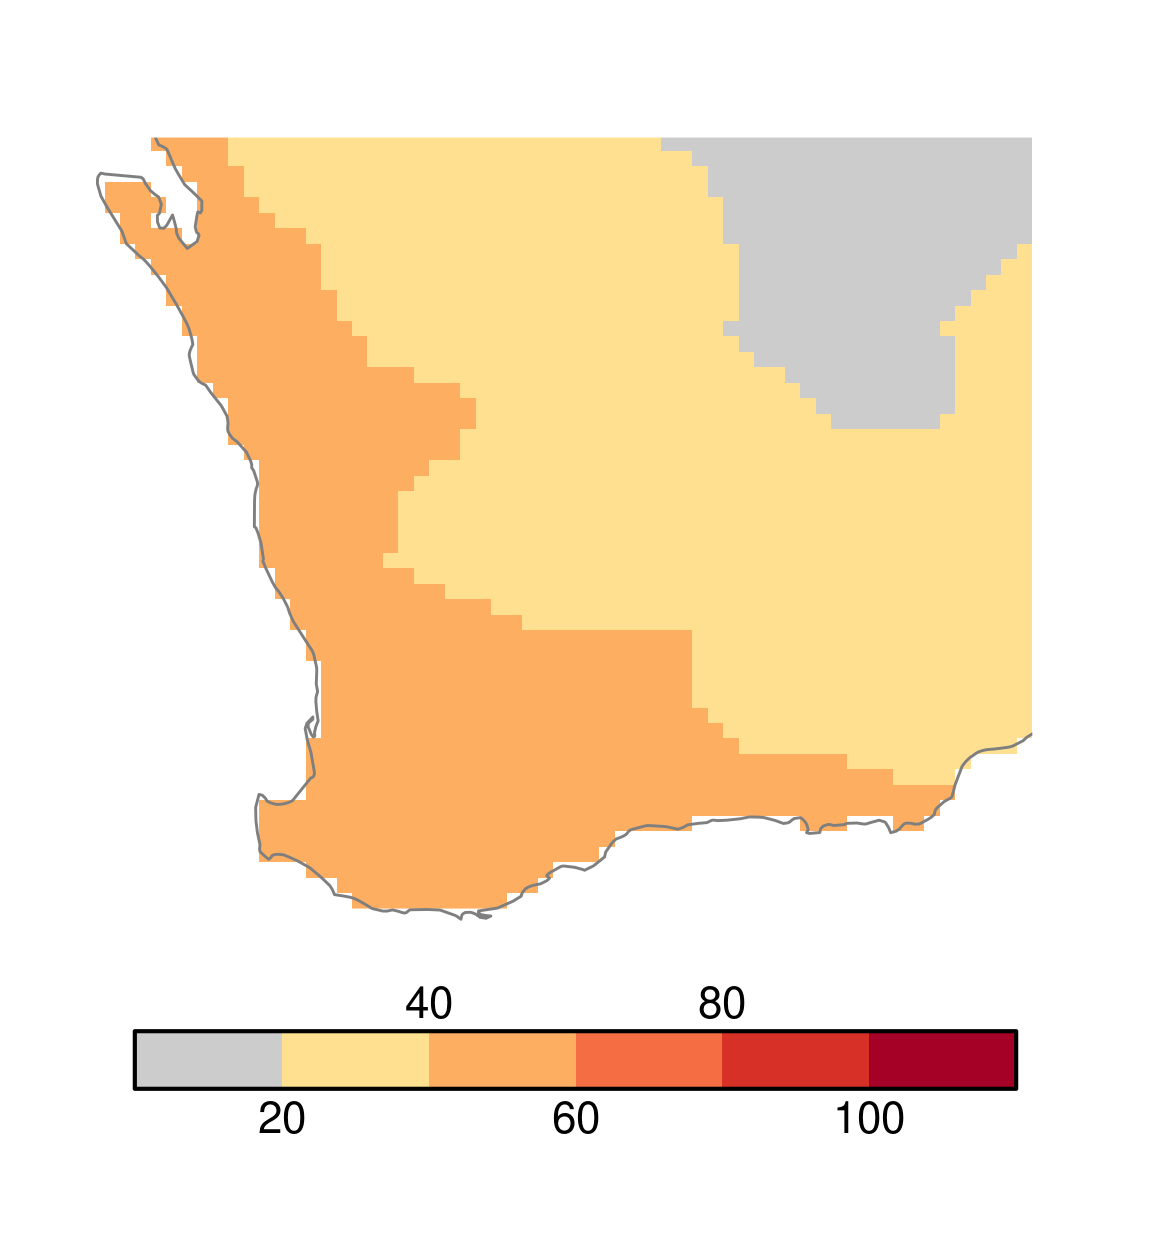 percentage change in drought frequency south west Western Australia